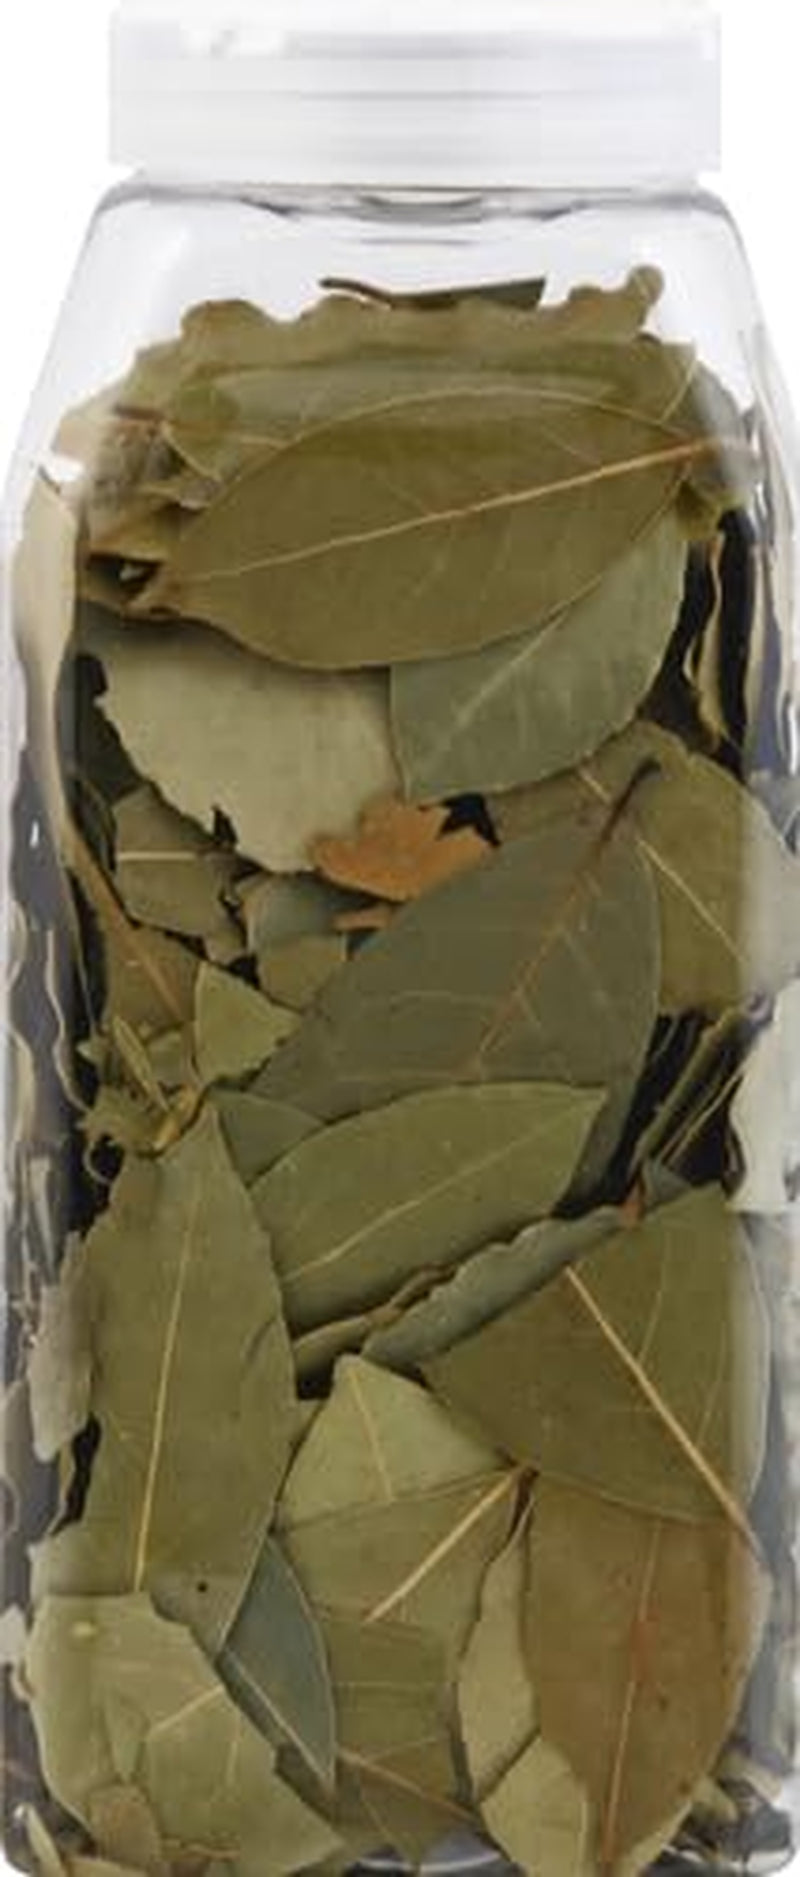 Bay Leaves Whole, 1.5-Ounce (Pack of 6)